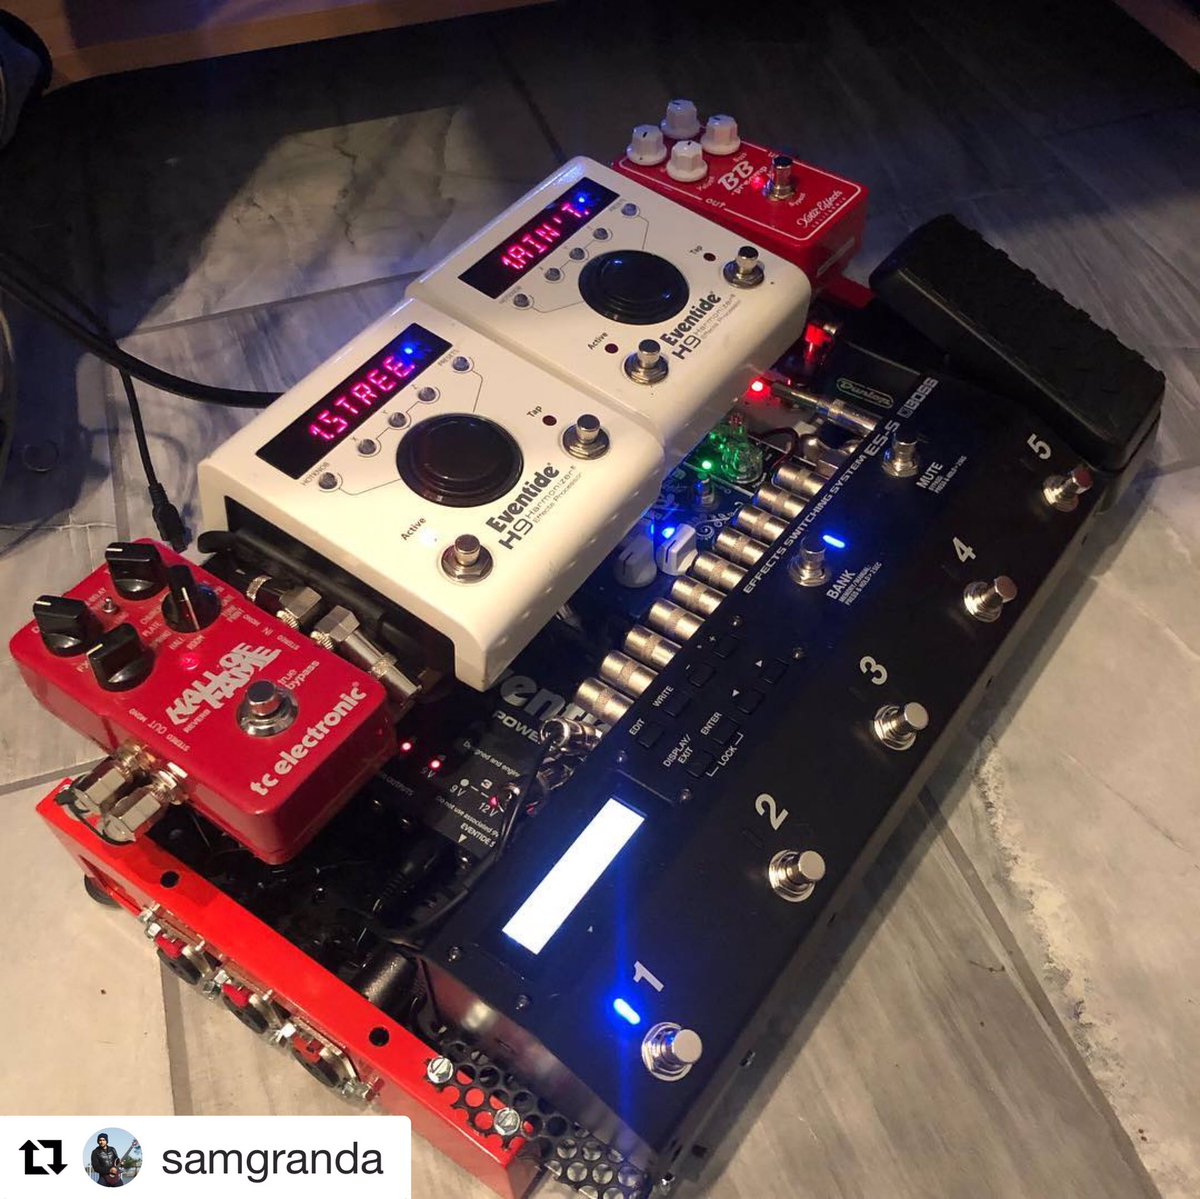 @samgranda
・・・
My second Little board Based on the Big one i made couple months ago. running 2 H9s One is the max and the core version and i'm sharing the algorithyms which its so cool.
#templeaudiosolo18 #eventideh9 #eventide #bosses5 #bbpreamp #halloffamereverb  #minixvolume